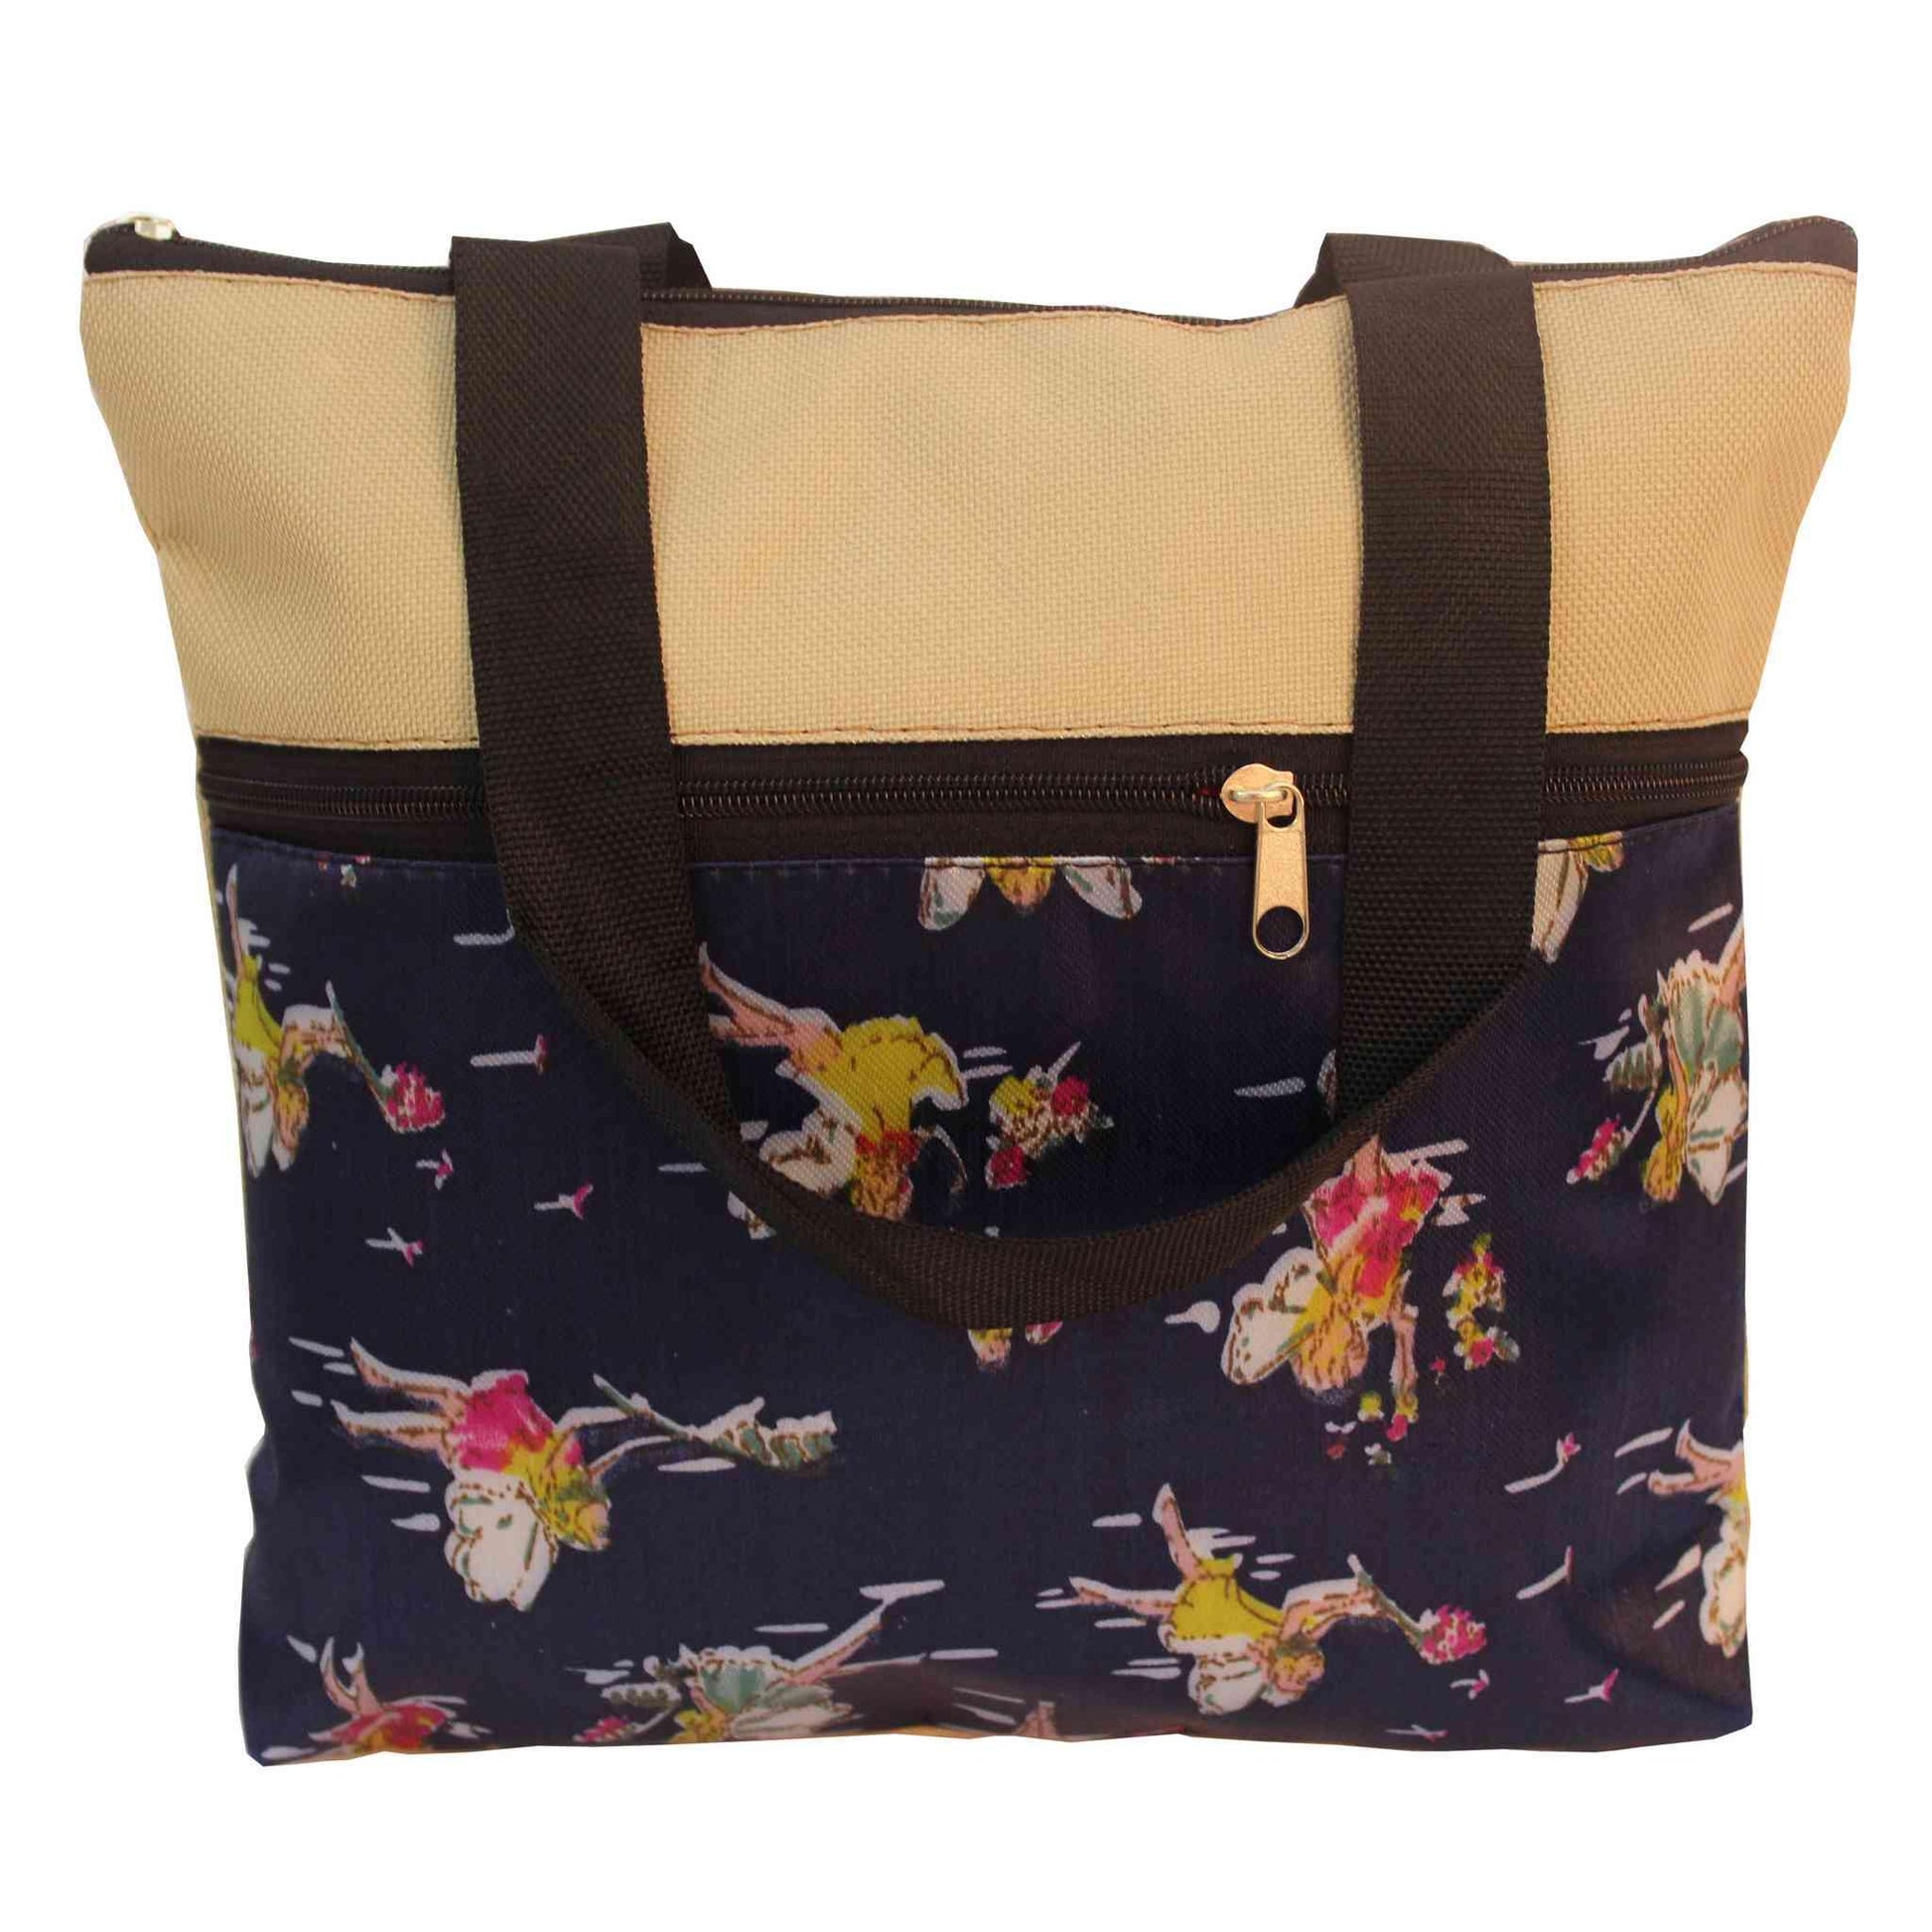 Indian Petals Imported Durable Canvas Printed multi purpose utility Medium size Bag with handles for all occasions for the girls and ladies, Design 1, Brown - Indian Petals